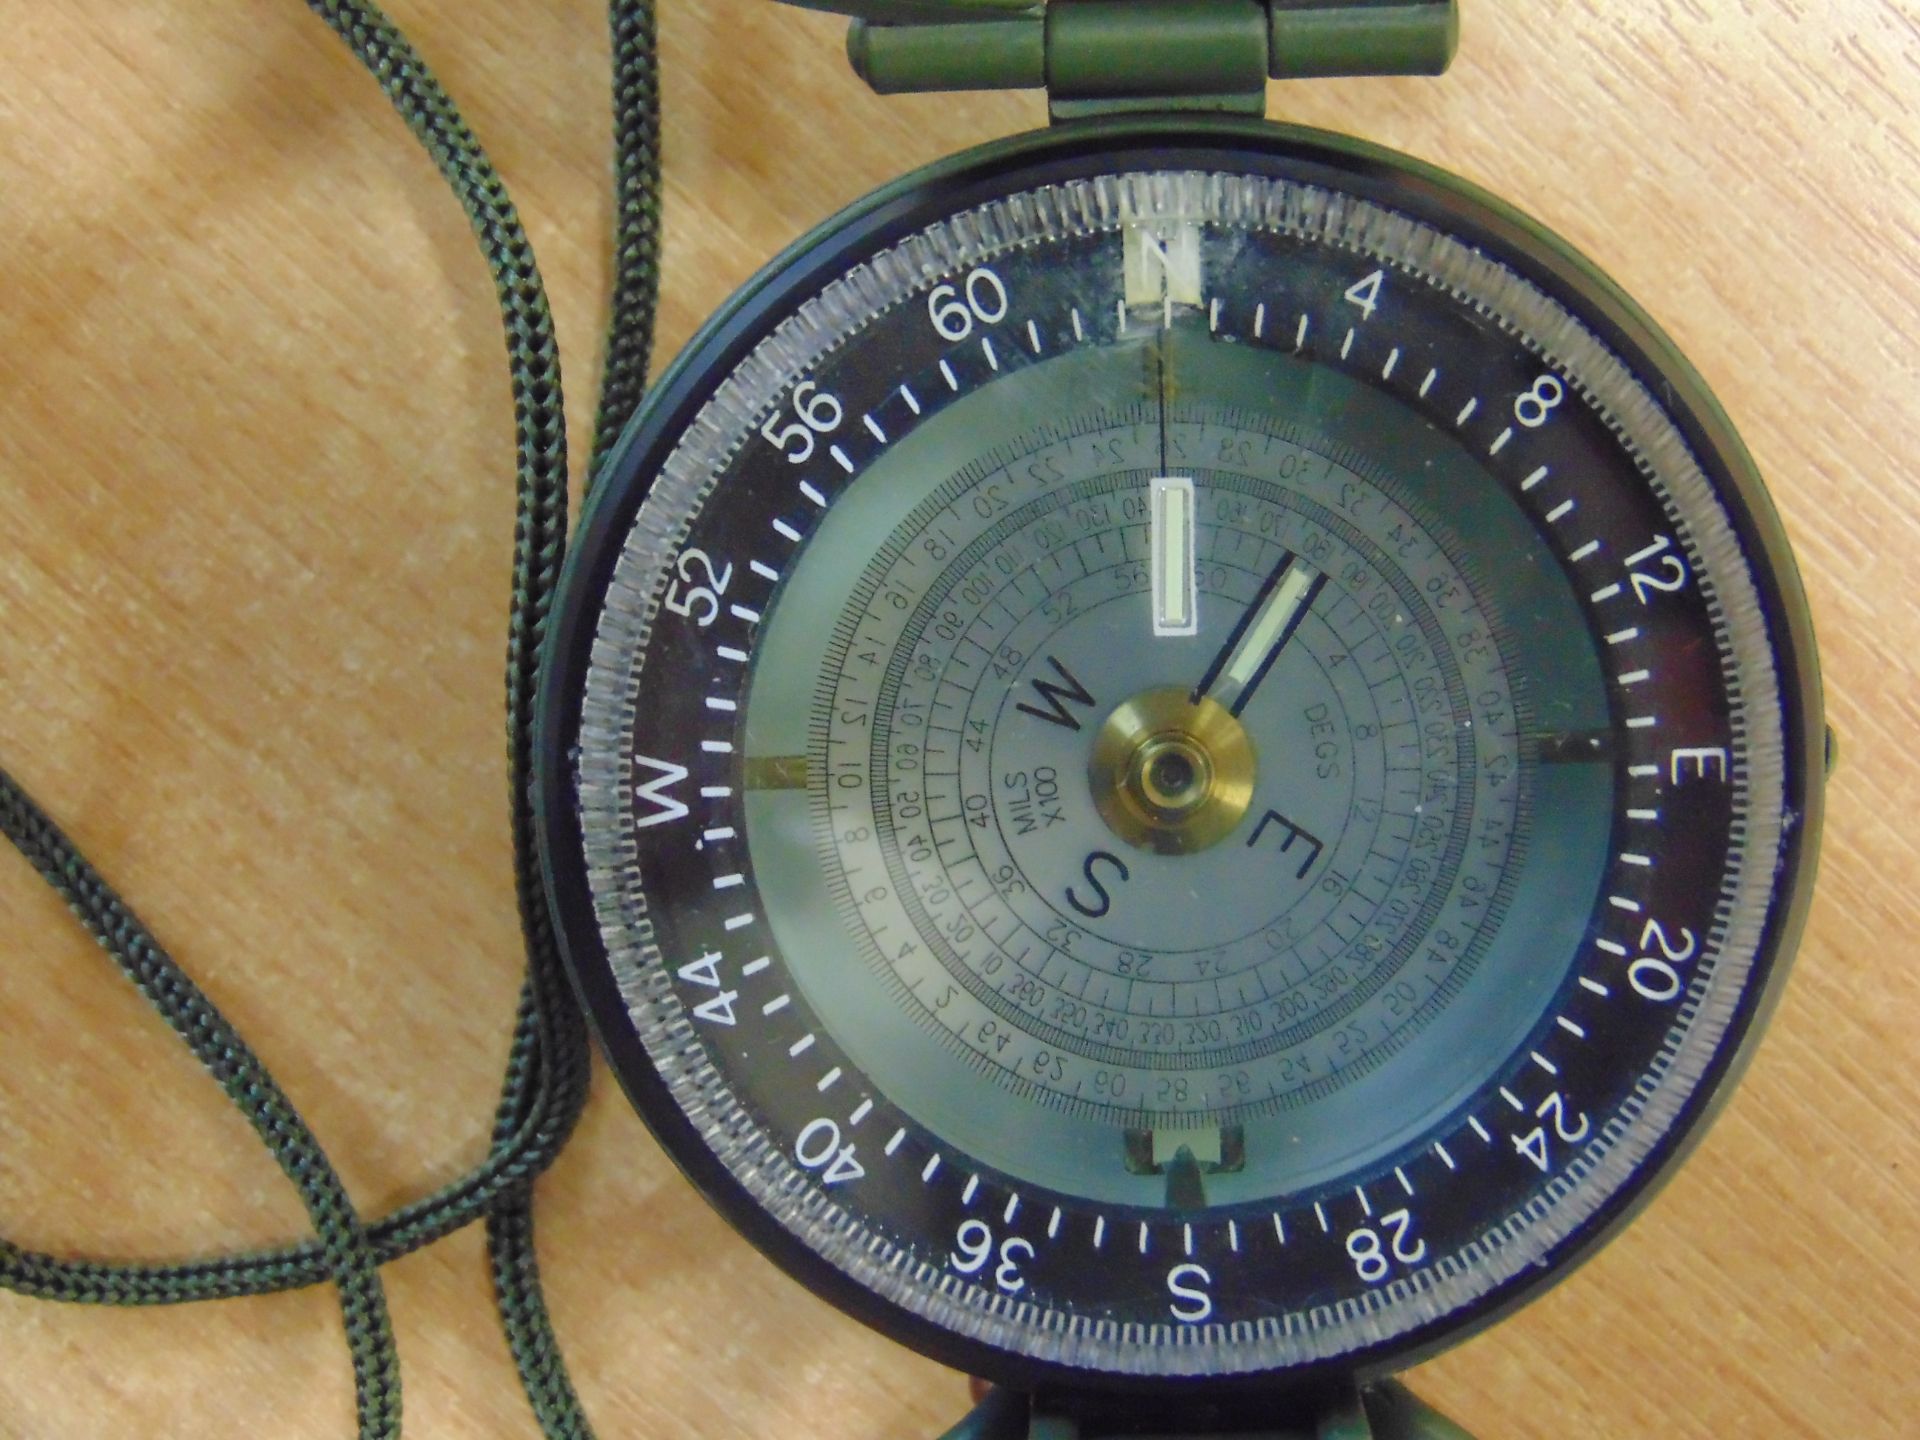 NEW UNISSUED FRANCIS BAKER M88 BRITISH ARMY PRISMATIC COMPASS NATO MARKS IN MILS - Image 3 of 6